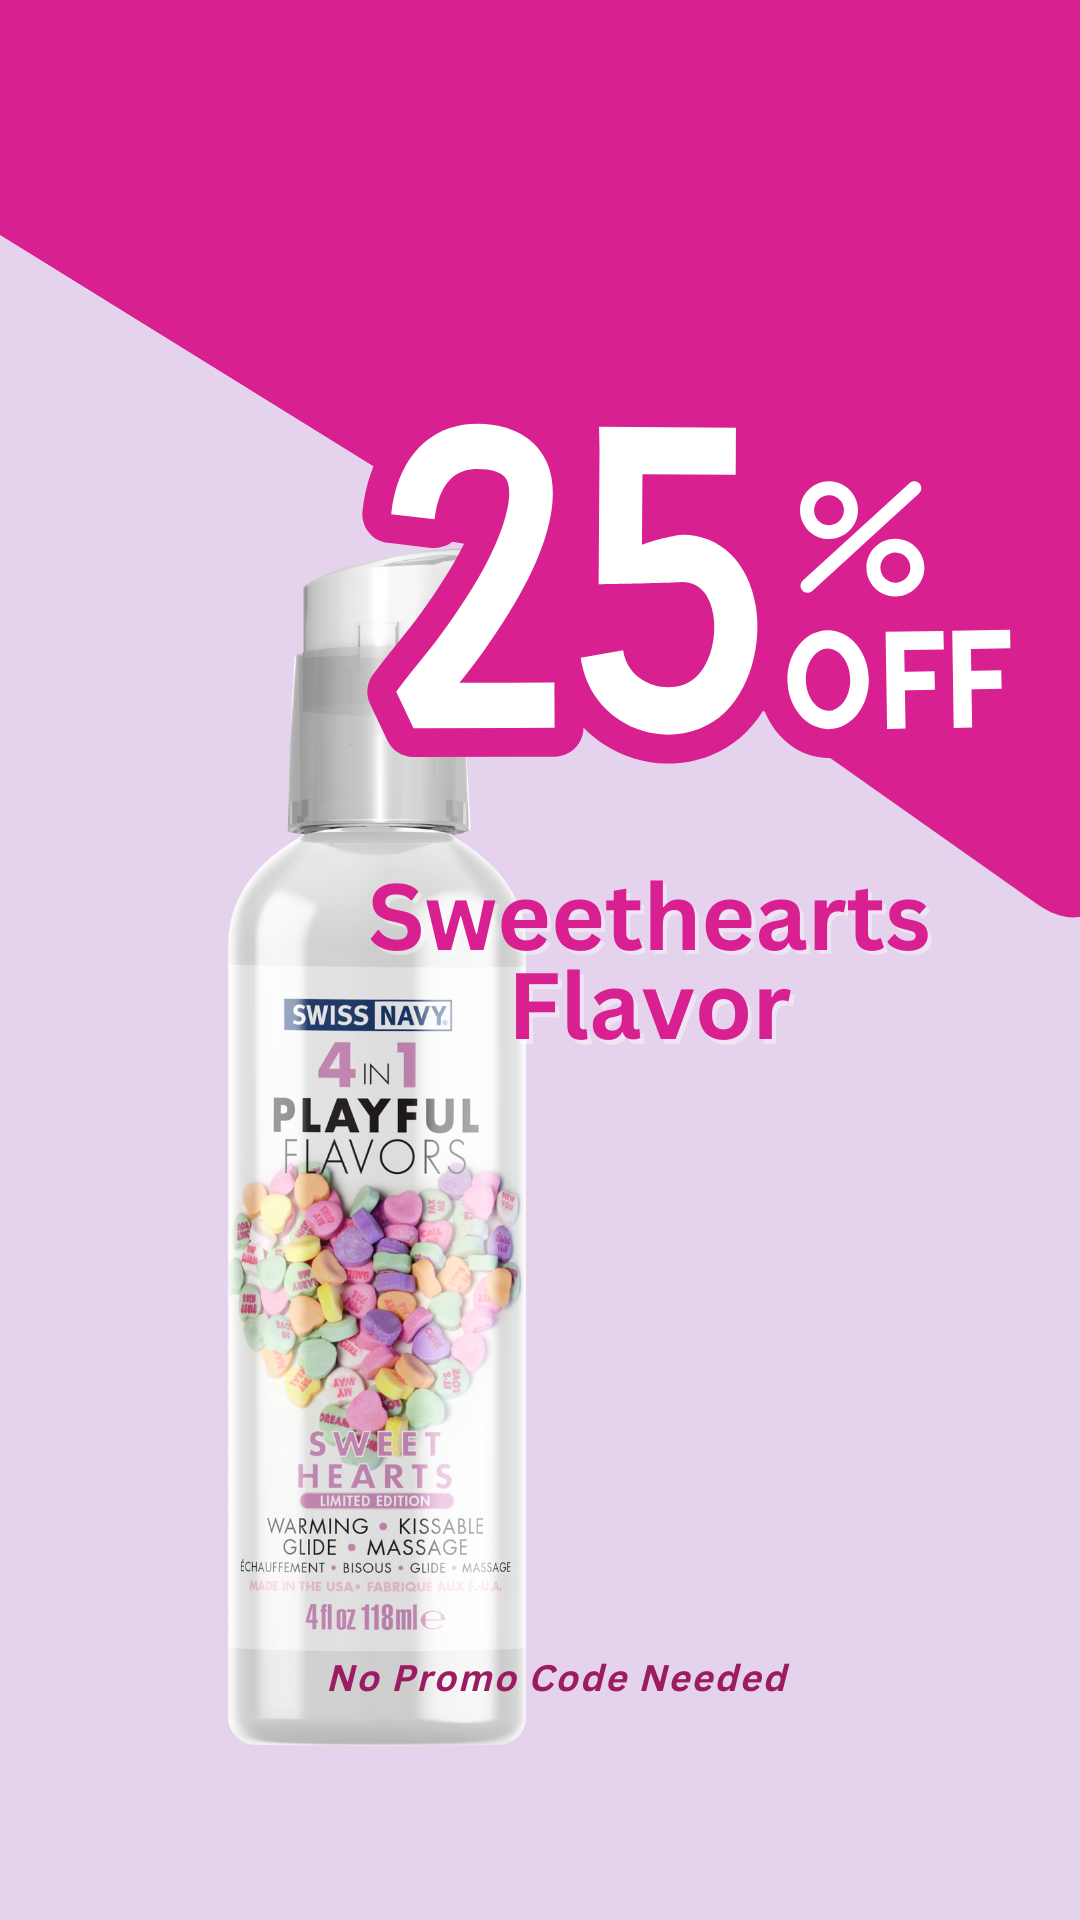 Playful Flavors Limited Edition Sweethearts